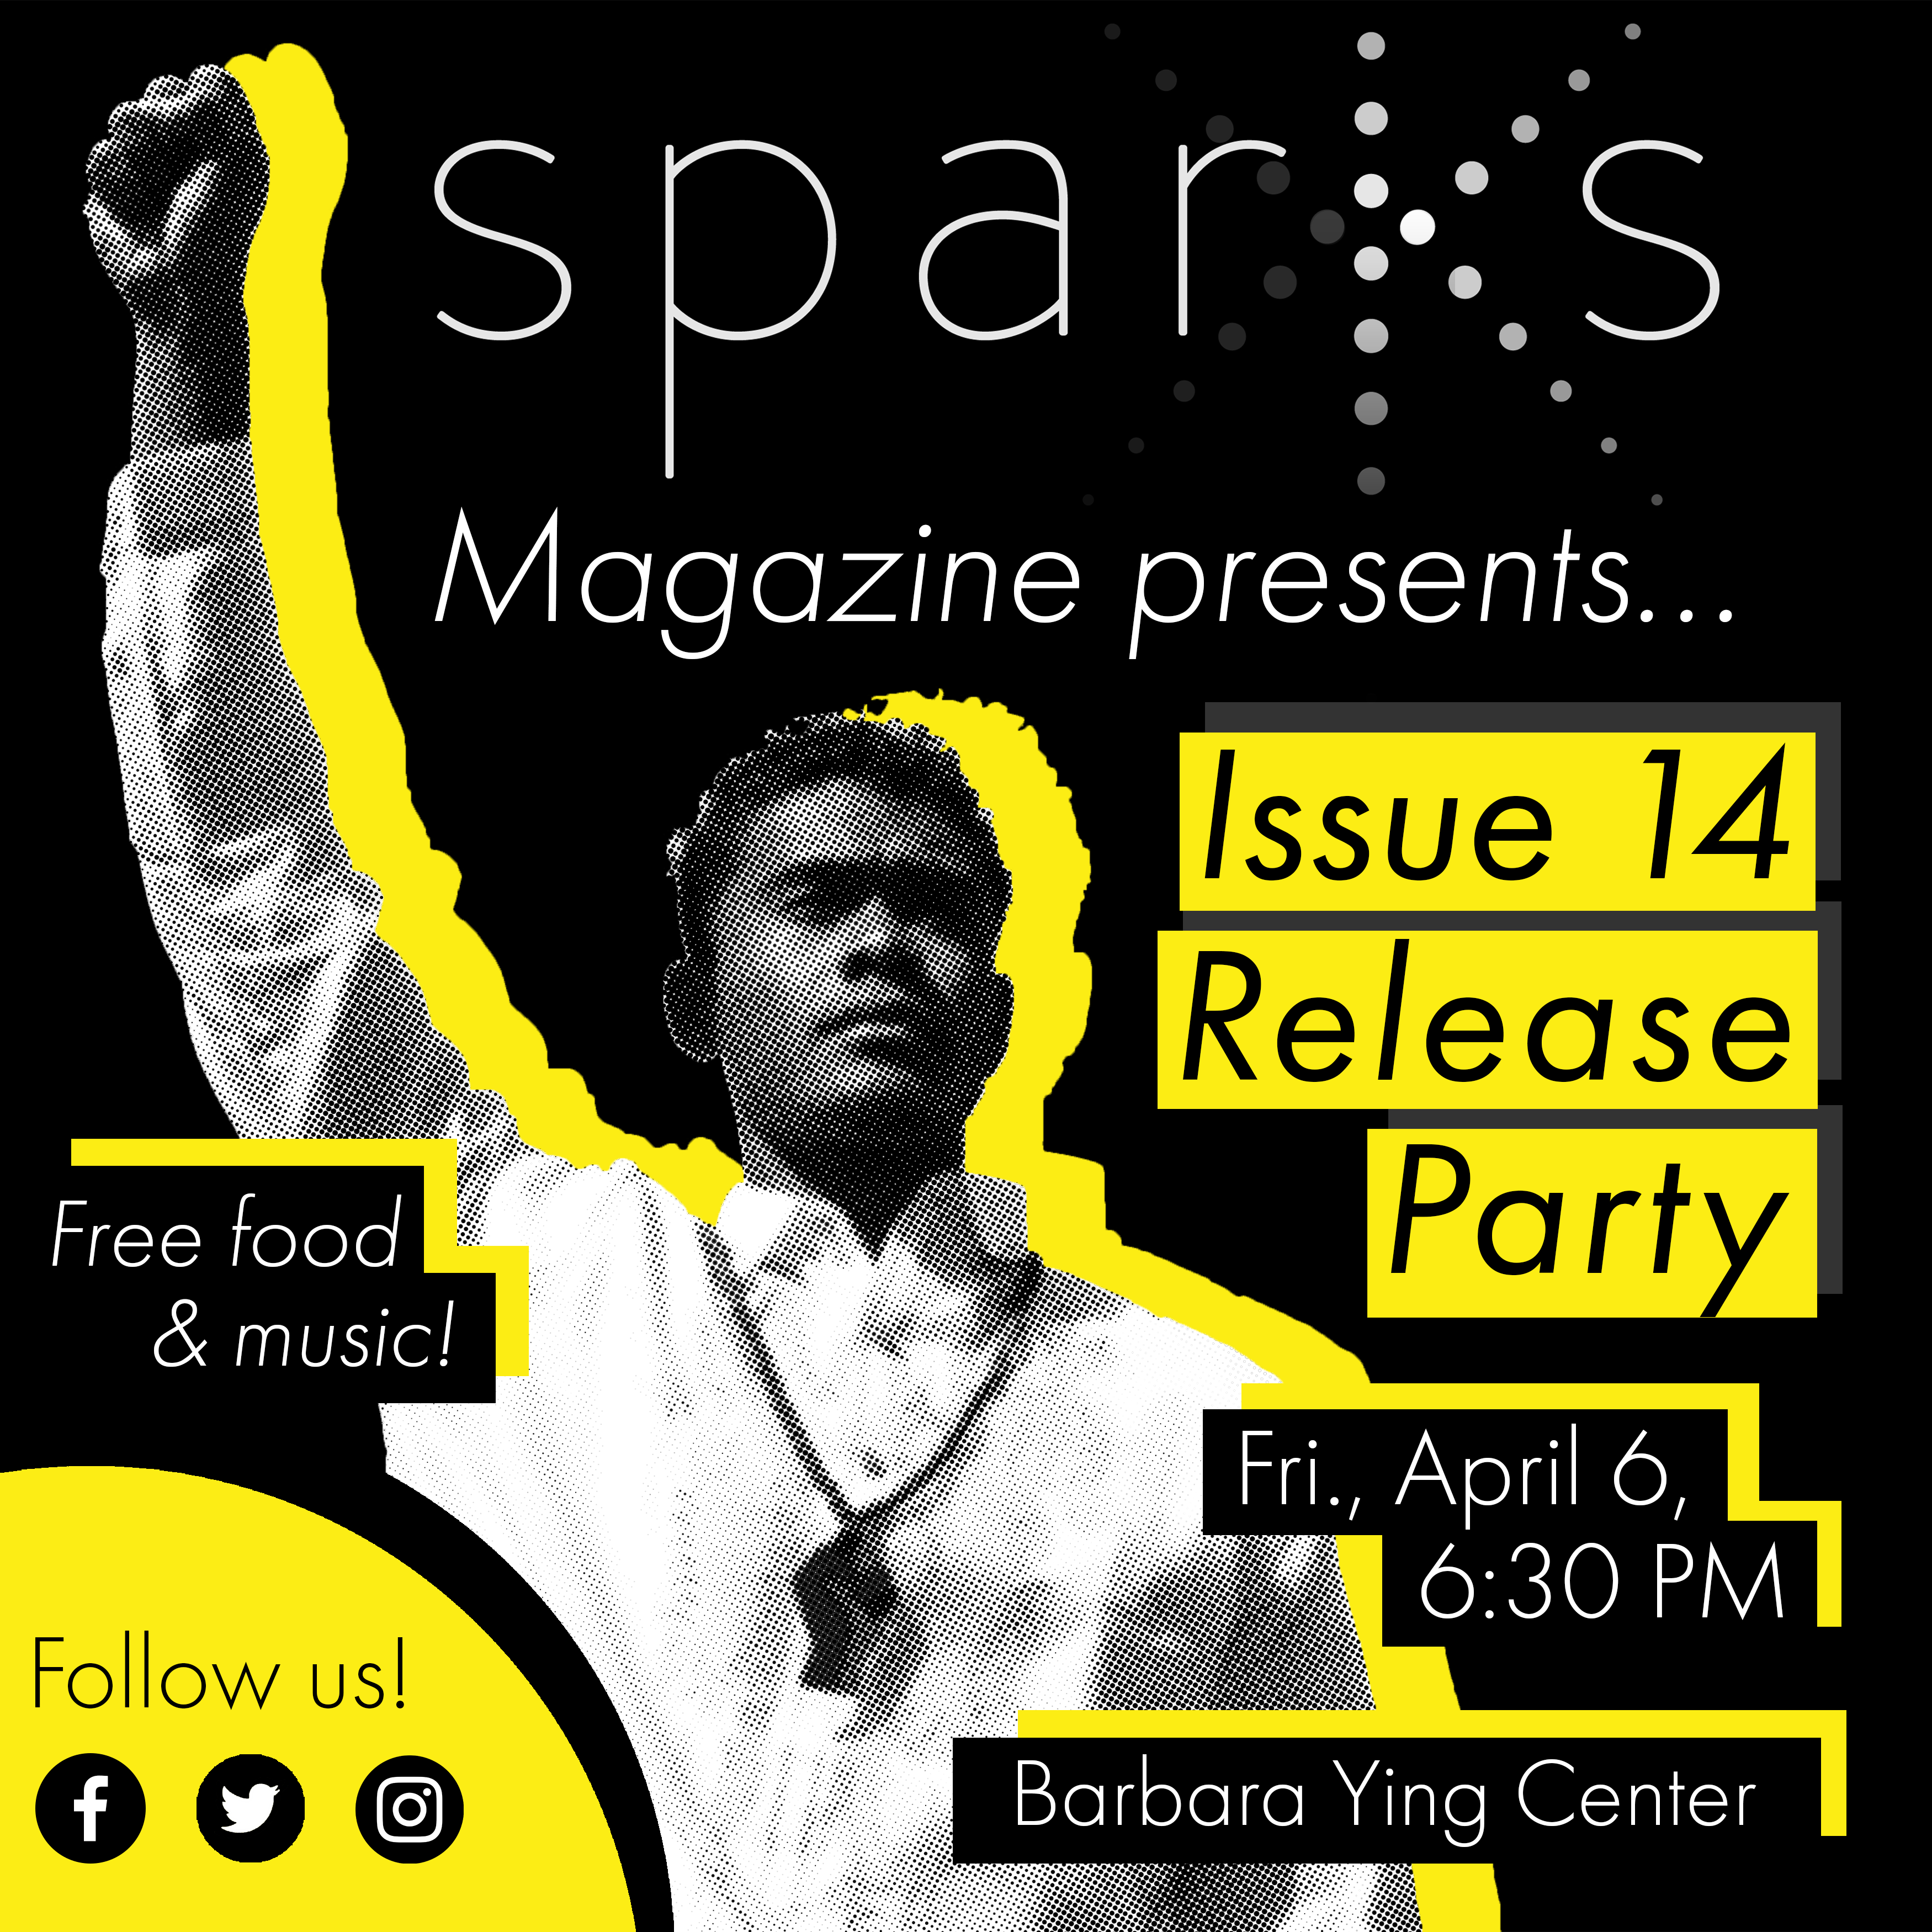 A Black Filipino American man raises his fist in power. Words advertise Sparks Magazine's release party for Issue 14.